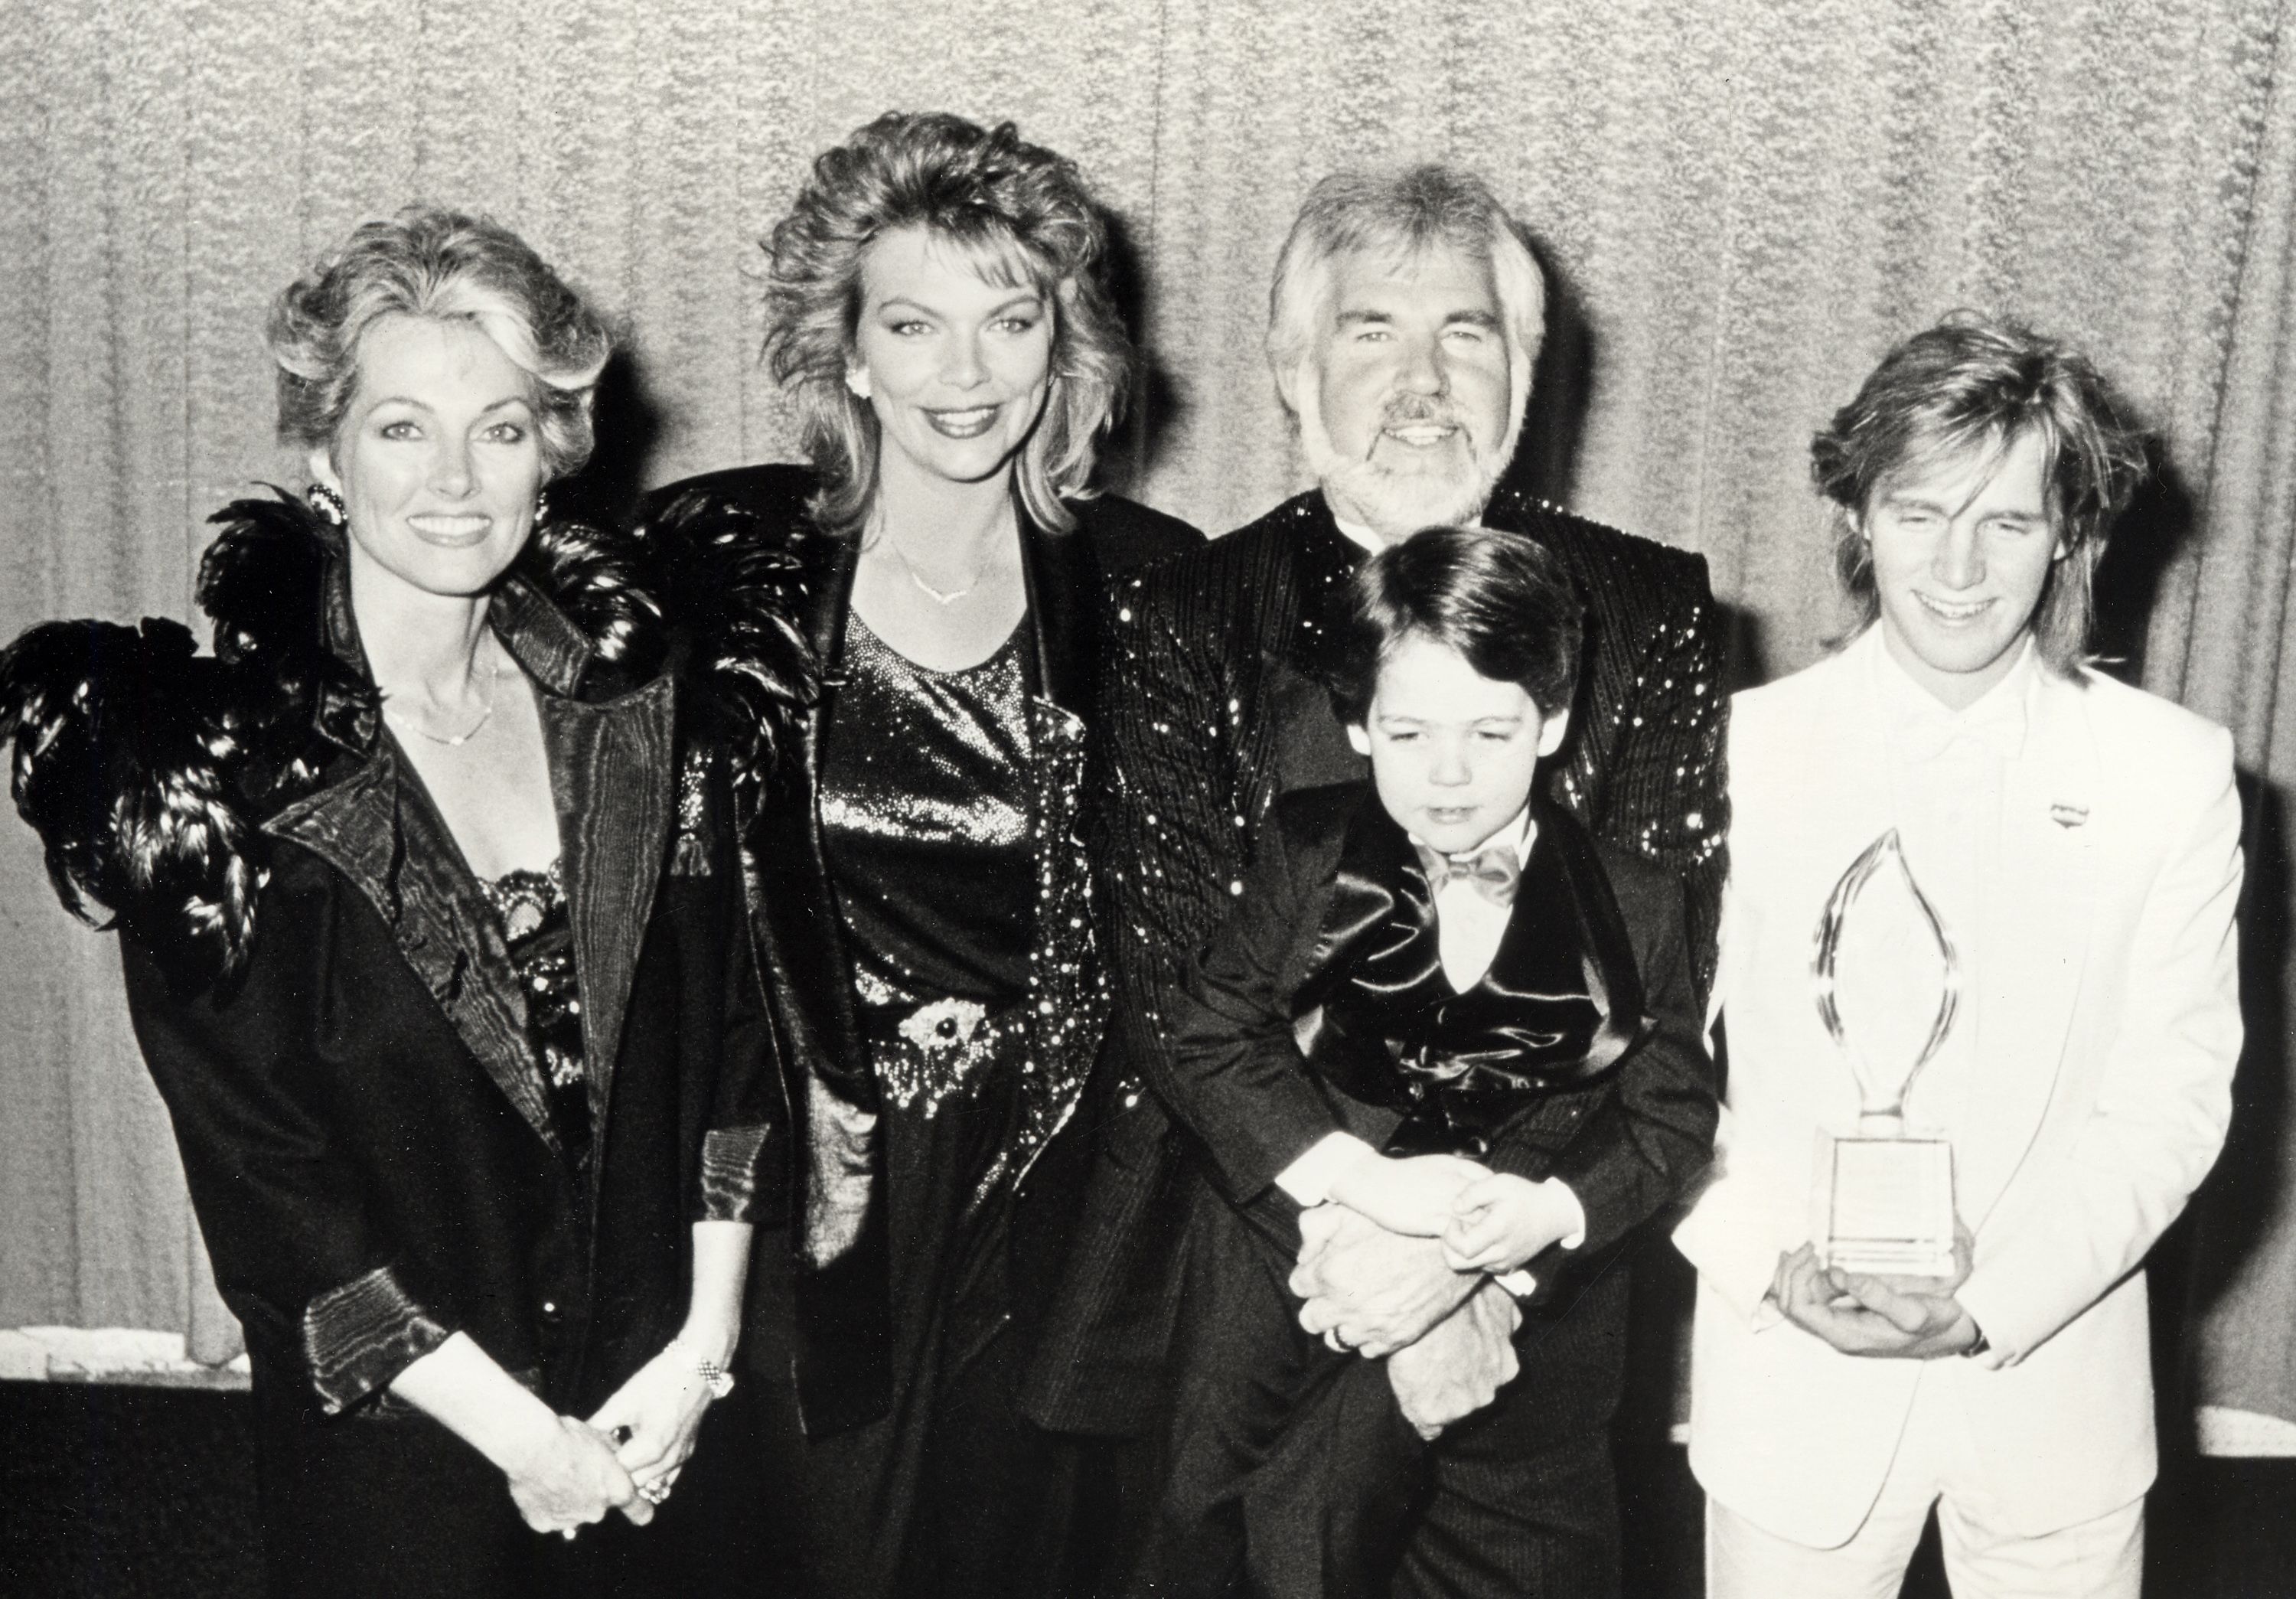 Kenny Rogers, wife Marianne Gordon, daughter Carol Rogers and sons Kenny Rogers Jr. and Christopher Rogers at the 12th Annual People's Choice Awards in 1986 | Source: Getty Images